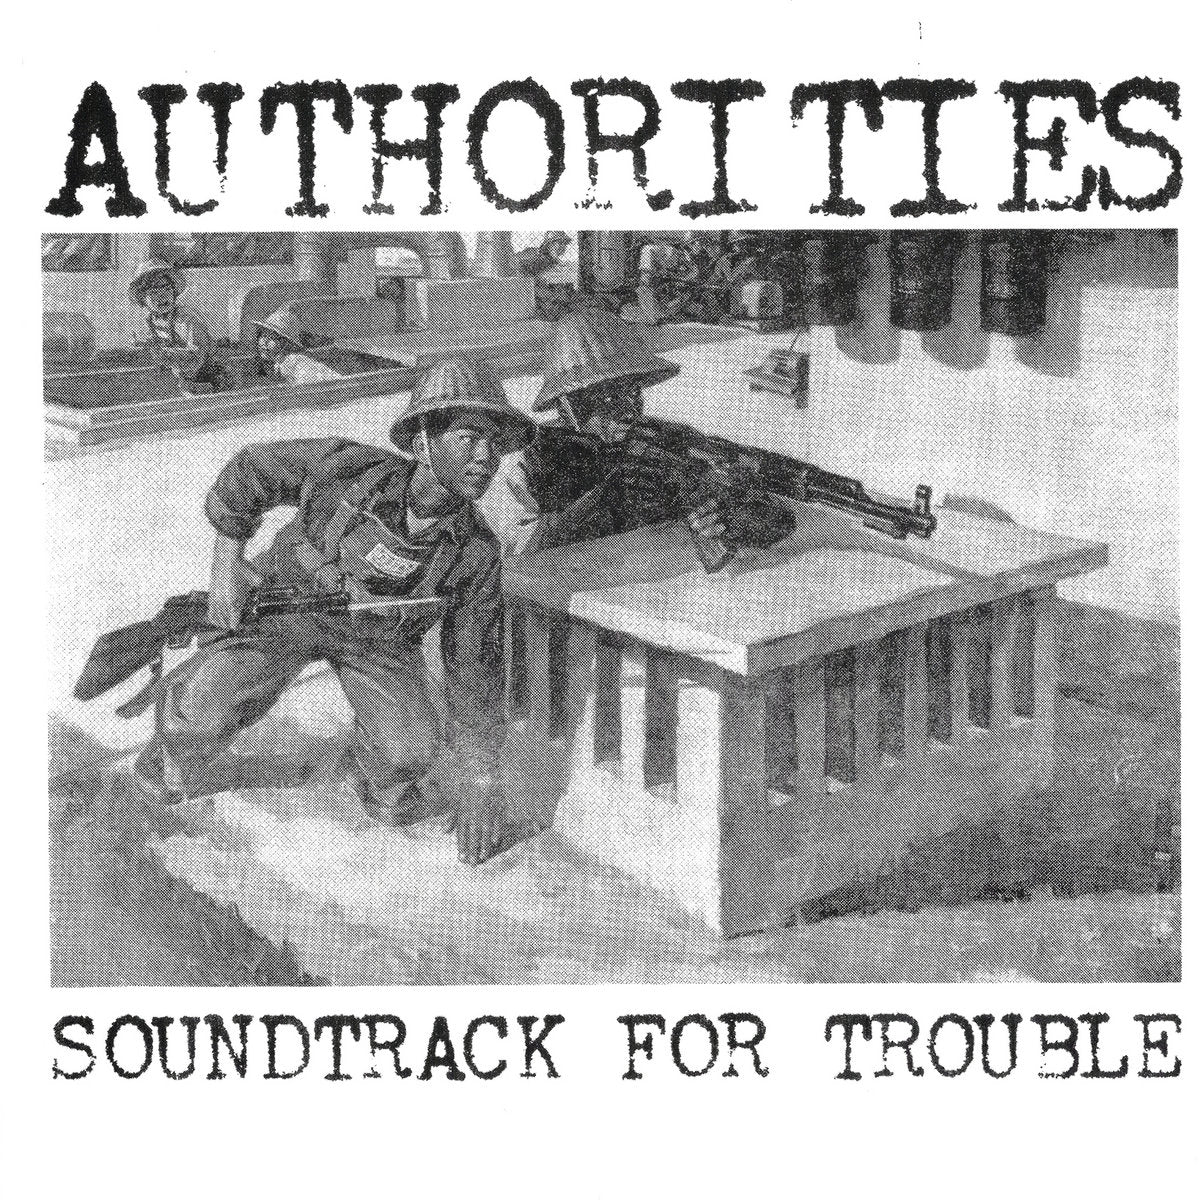 AUTHORITIES. THE – Soundtrack For Trouble 7"